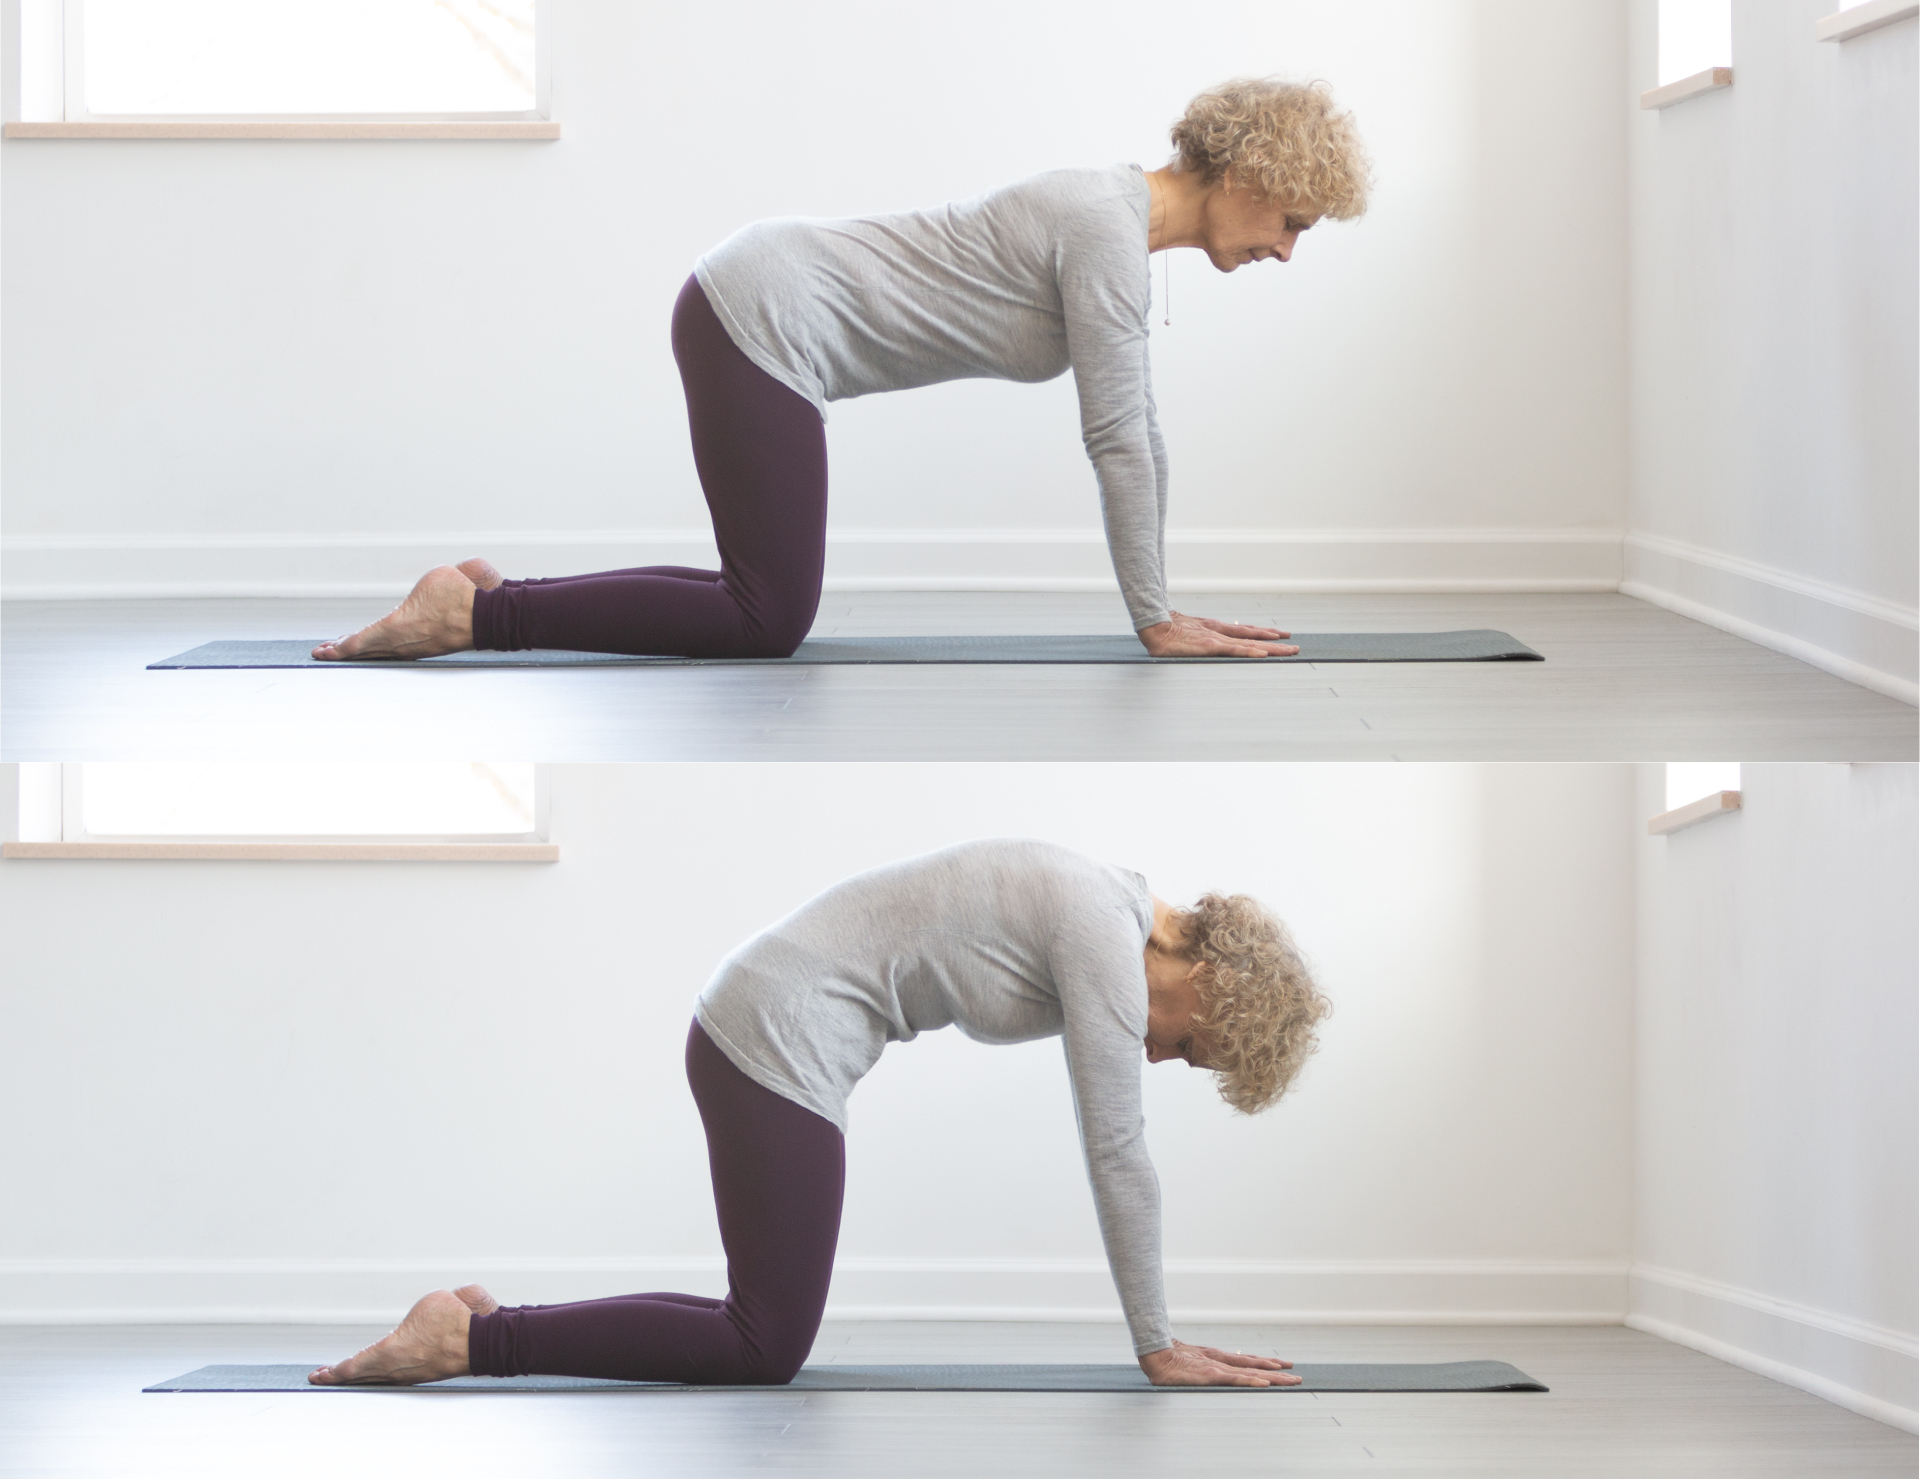 Common yoga poses associated with extreme spinal flexion (adapted